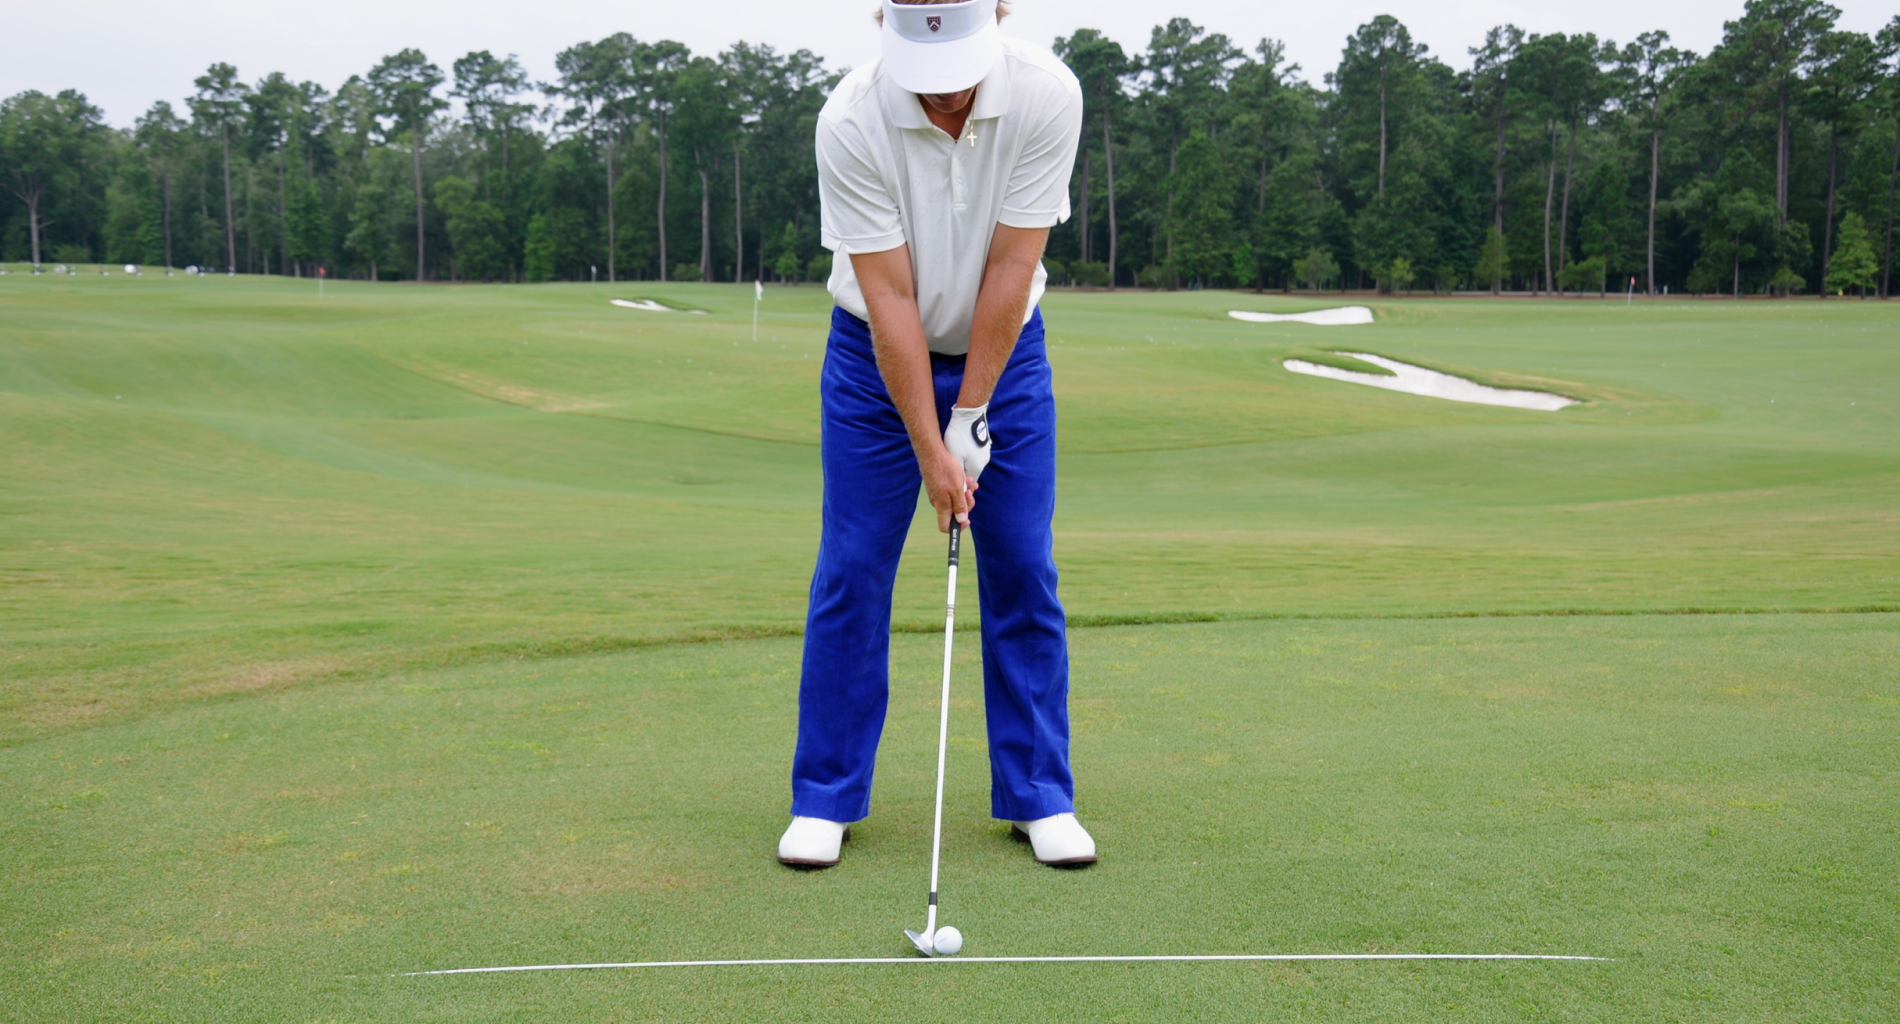 Golf Shaft Tips From Golf Champions: Unlock Your Potential - Golf Shaft Warehouse